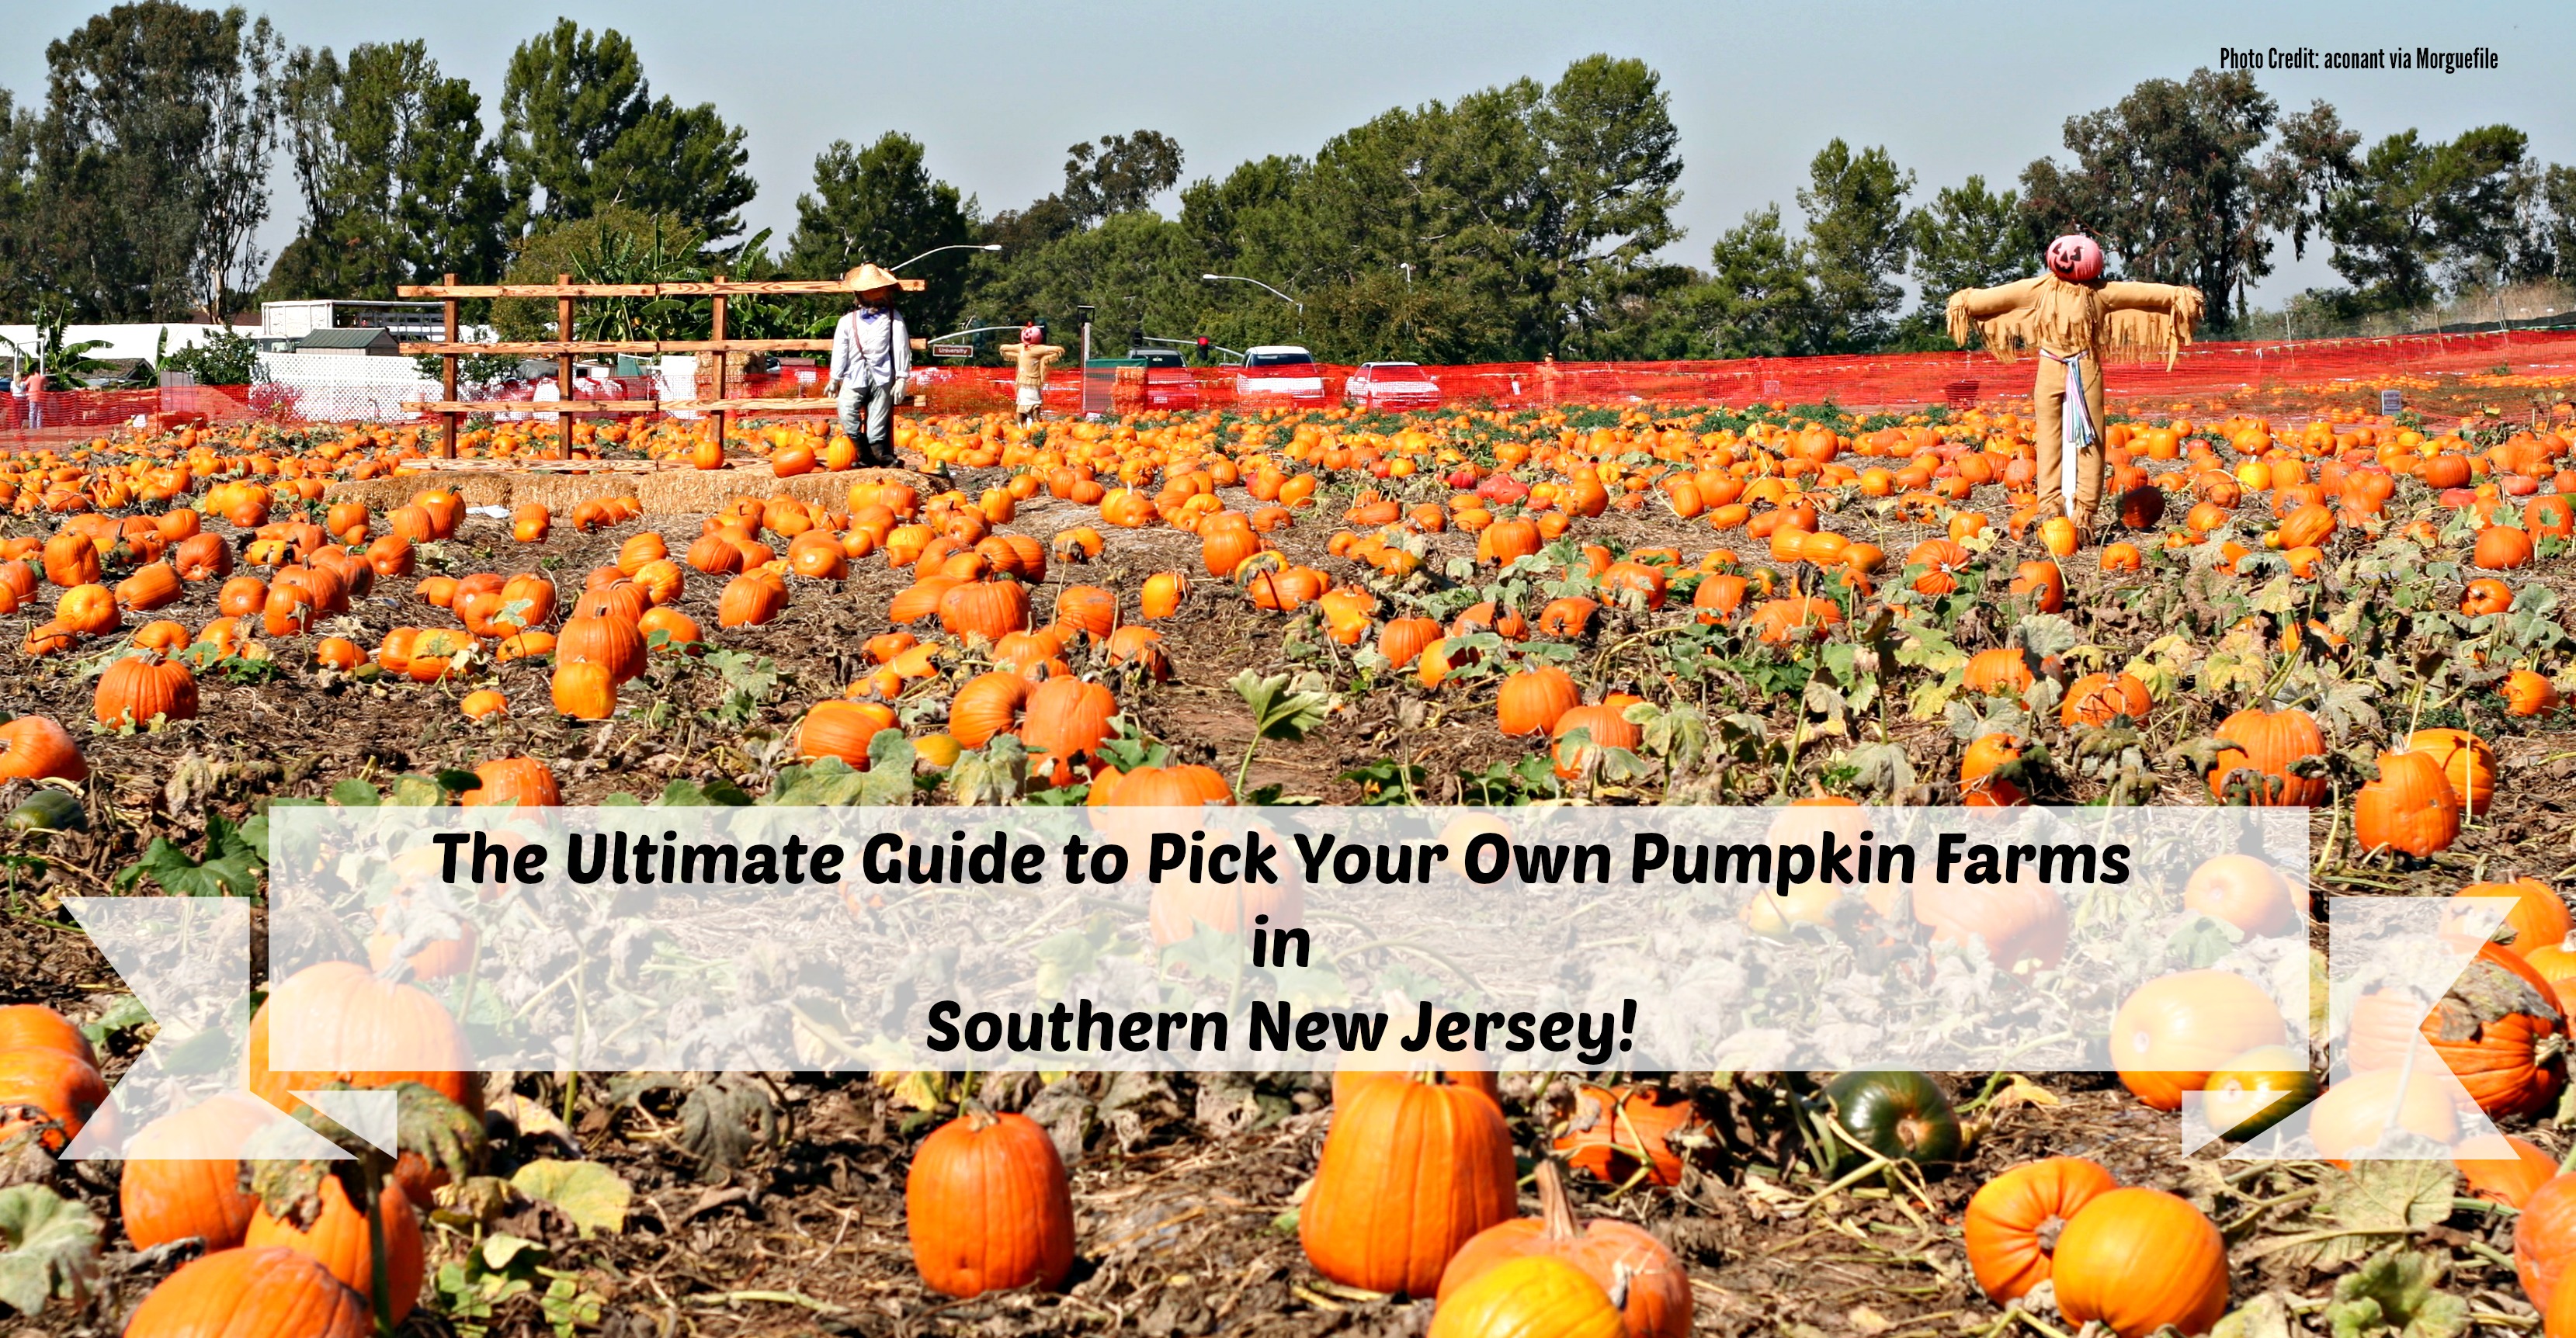 The Complete Guide to Pick Your Own Pumpkin Farms in South